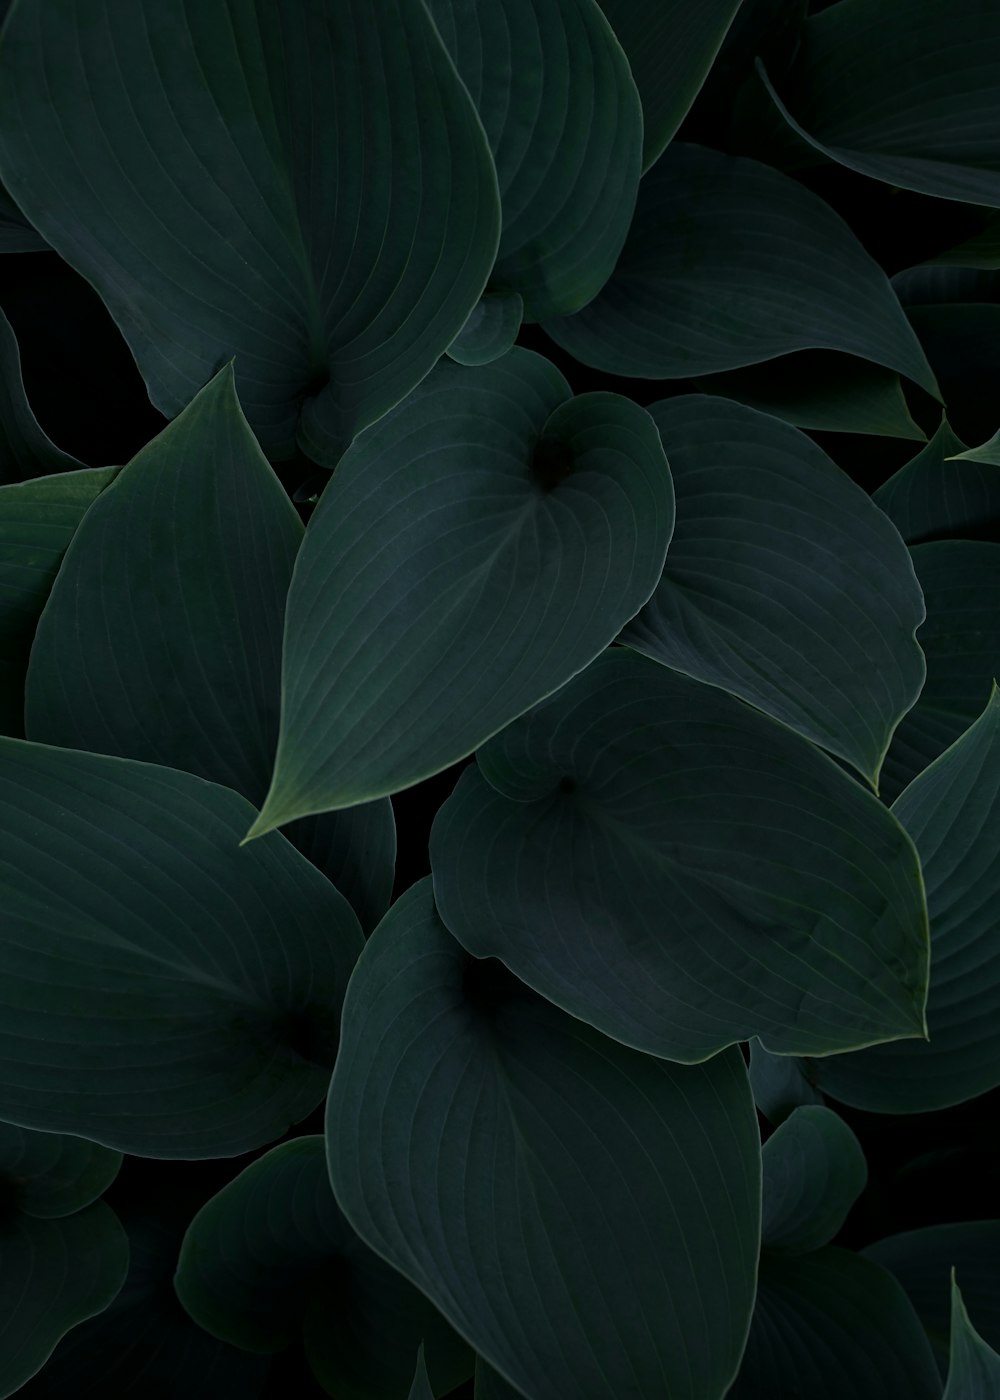 750+ Green Aesthetic Pictures  Download Free Images on Unsplash